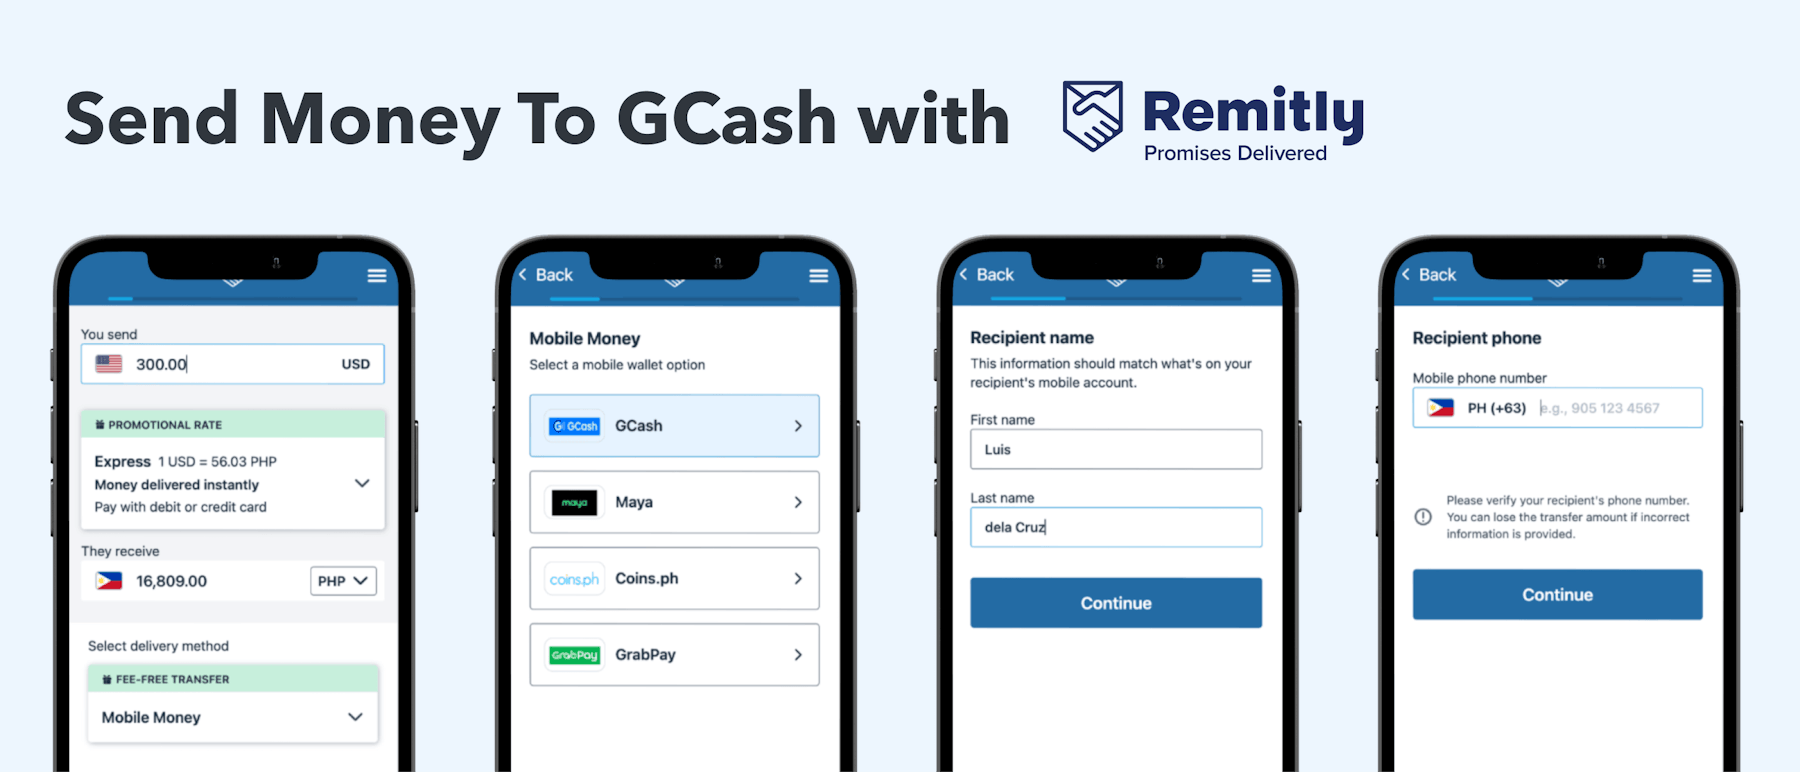 Send money to Gcash with Remitly